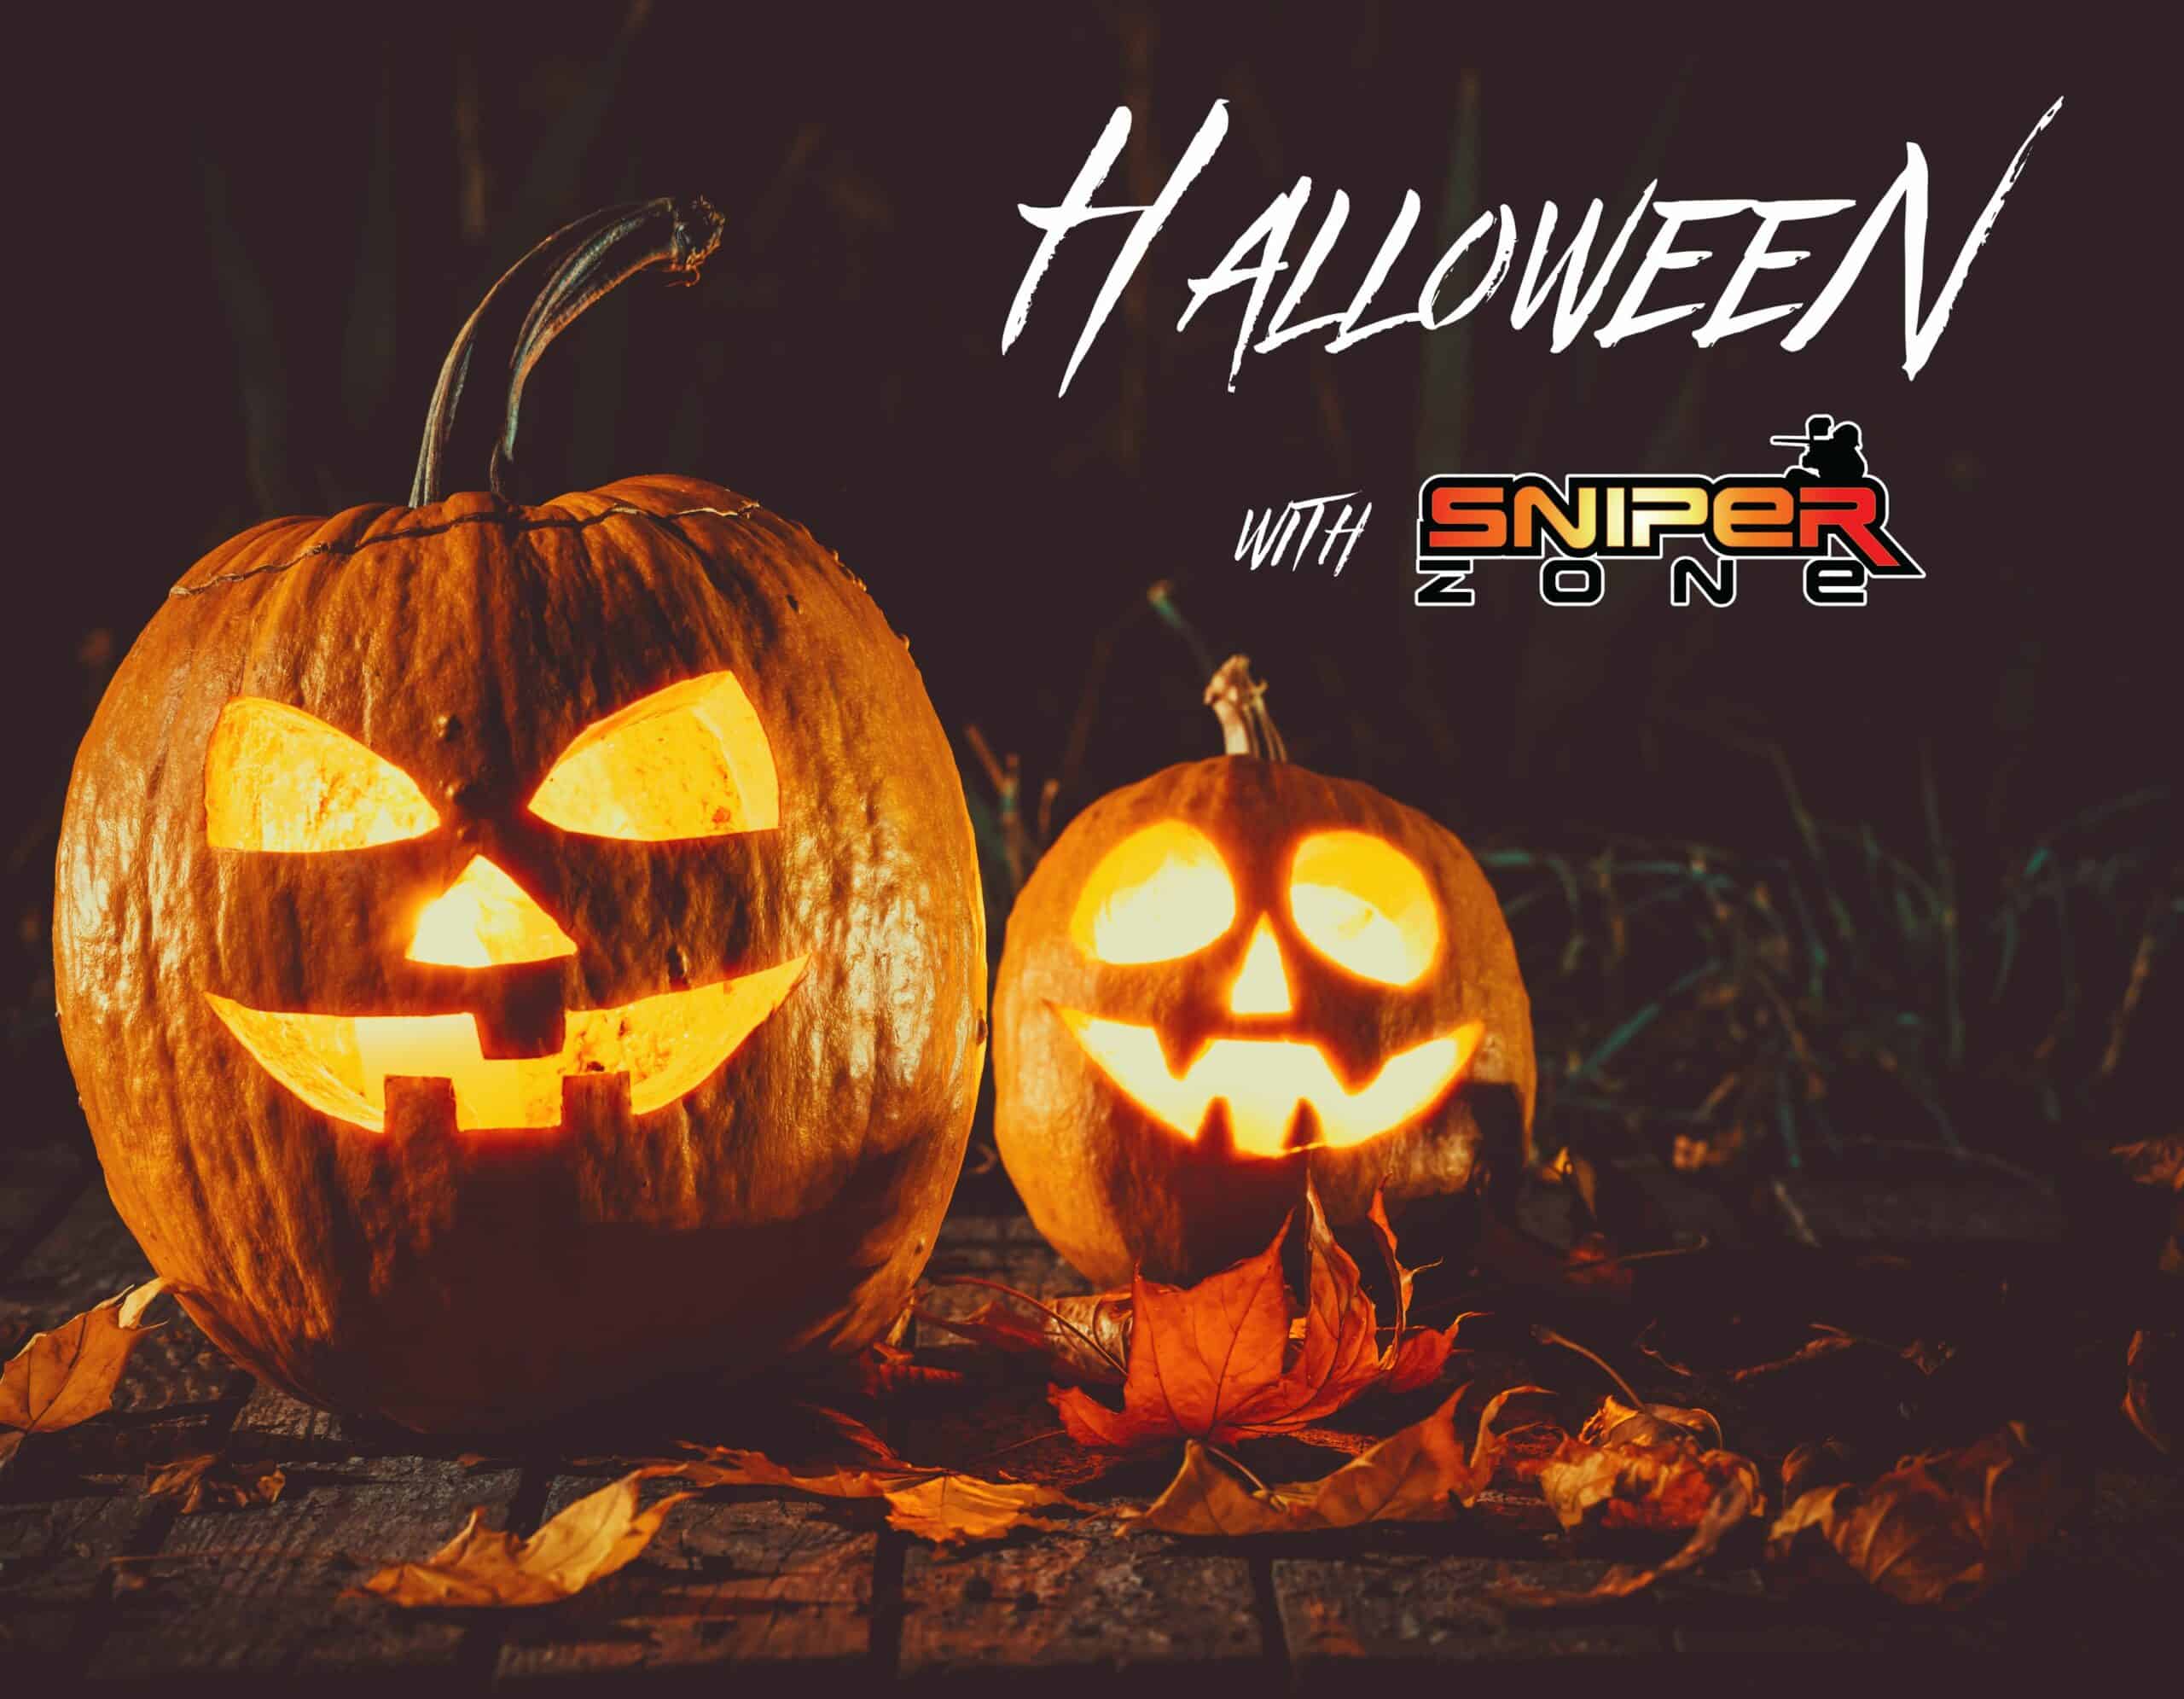 Halloween with SNIPER ZONE